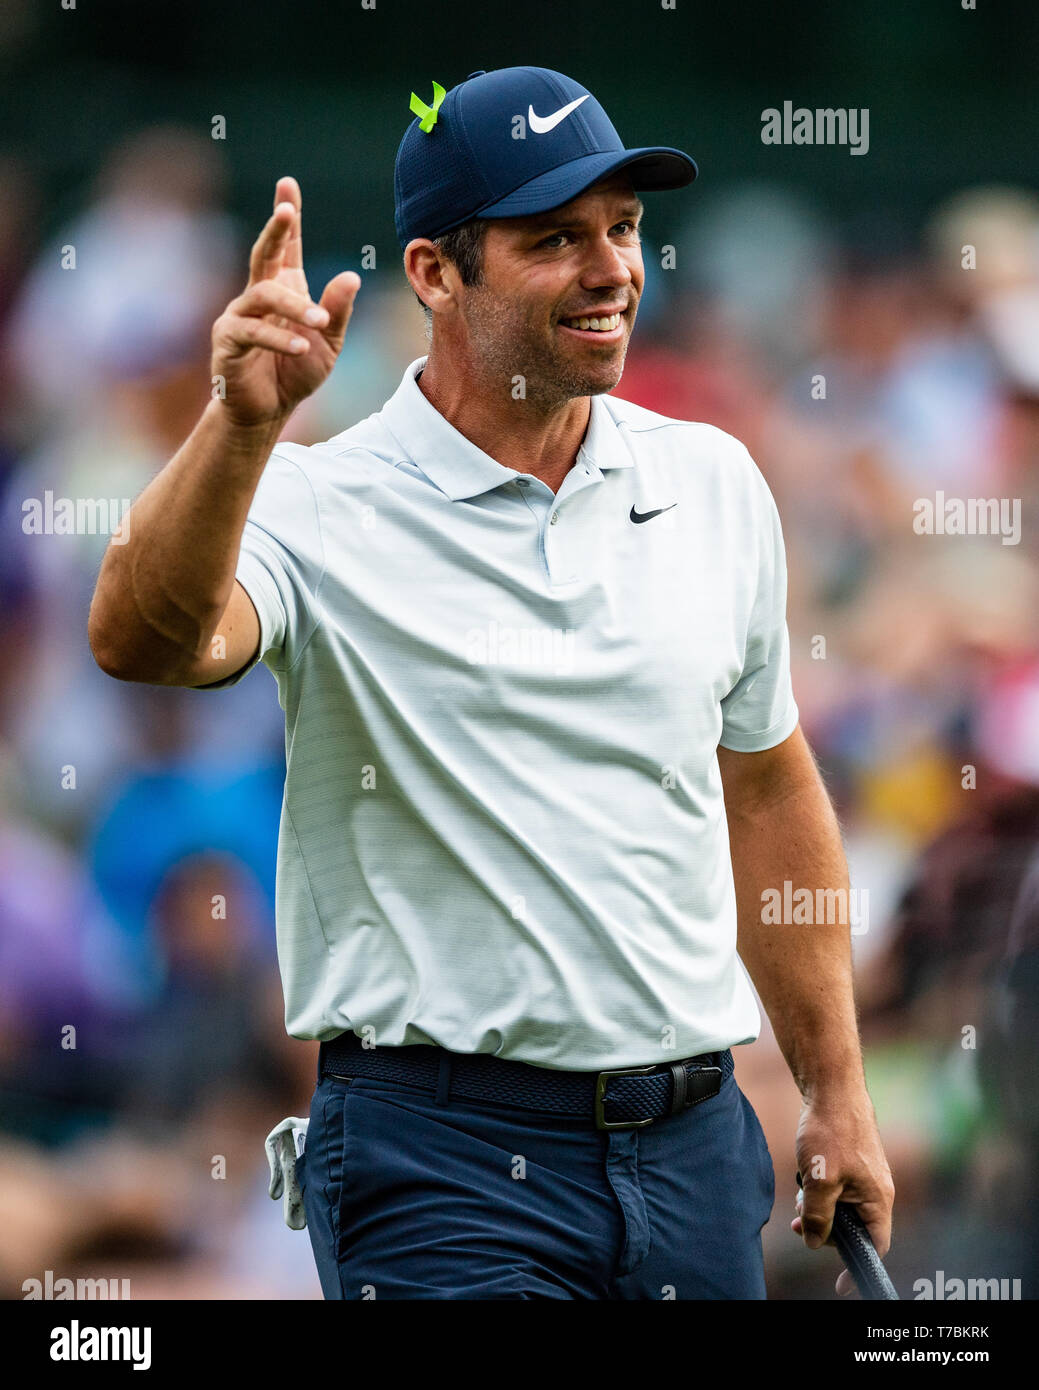 Charlotte, NC, USA. 5th May 2019. Paul Casey during the PGA Tour Wells Fargo Championship on Sunday May 5, 2019 at Quail Hollow Country Club in Charlotte, NC. Jacob Kupferman/CSM Credit: Cal Sport Media/Alamy Live News Stock Photo